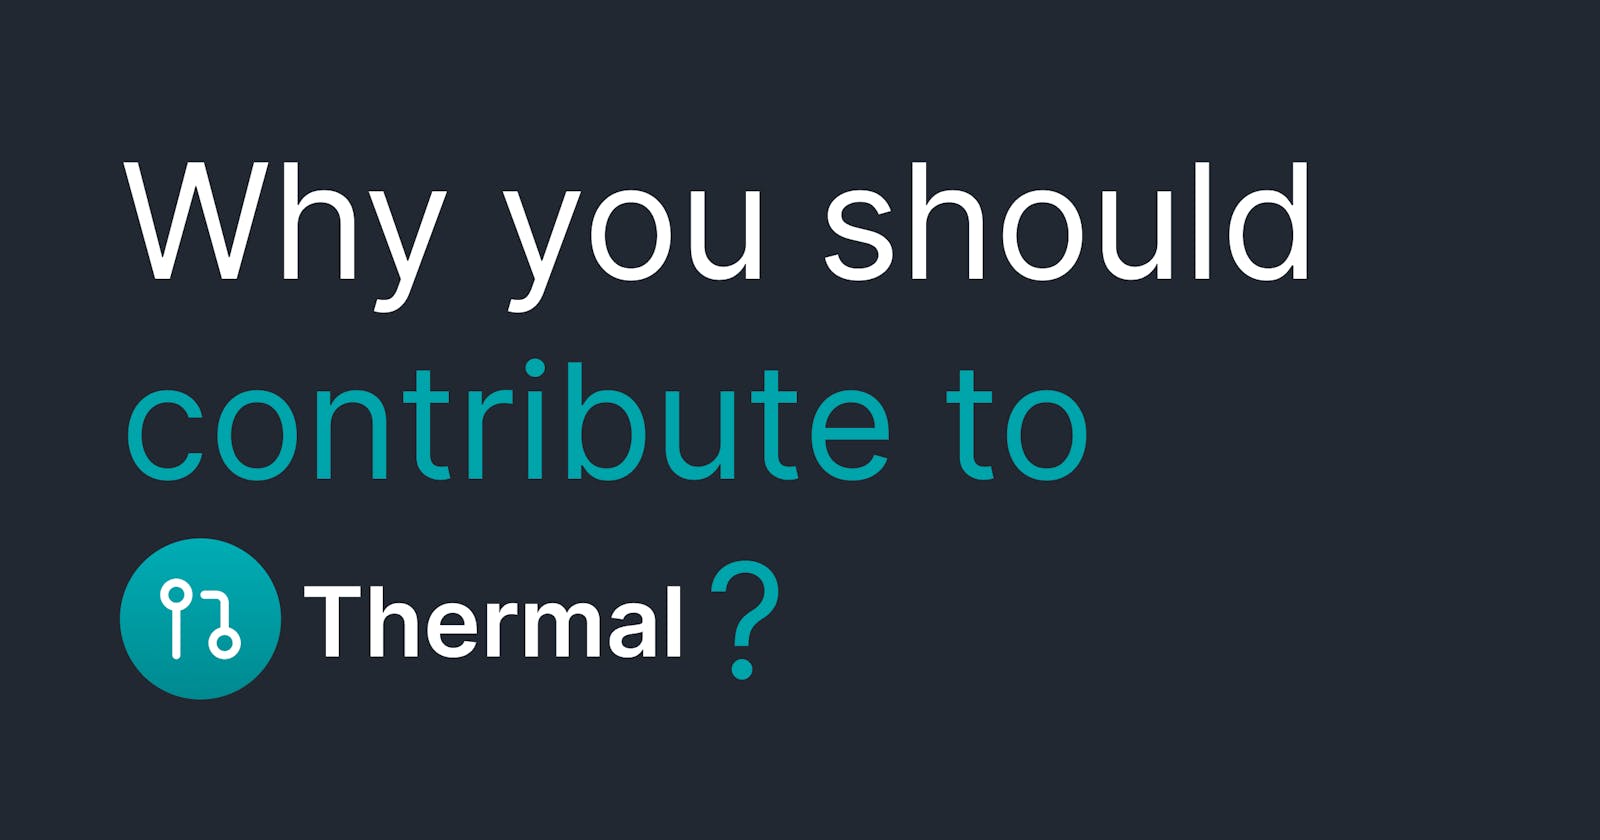 Why you should contribute to Thermal?